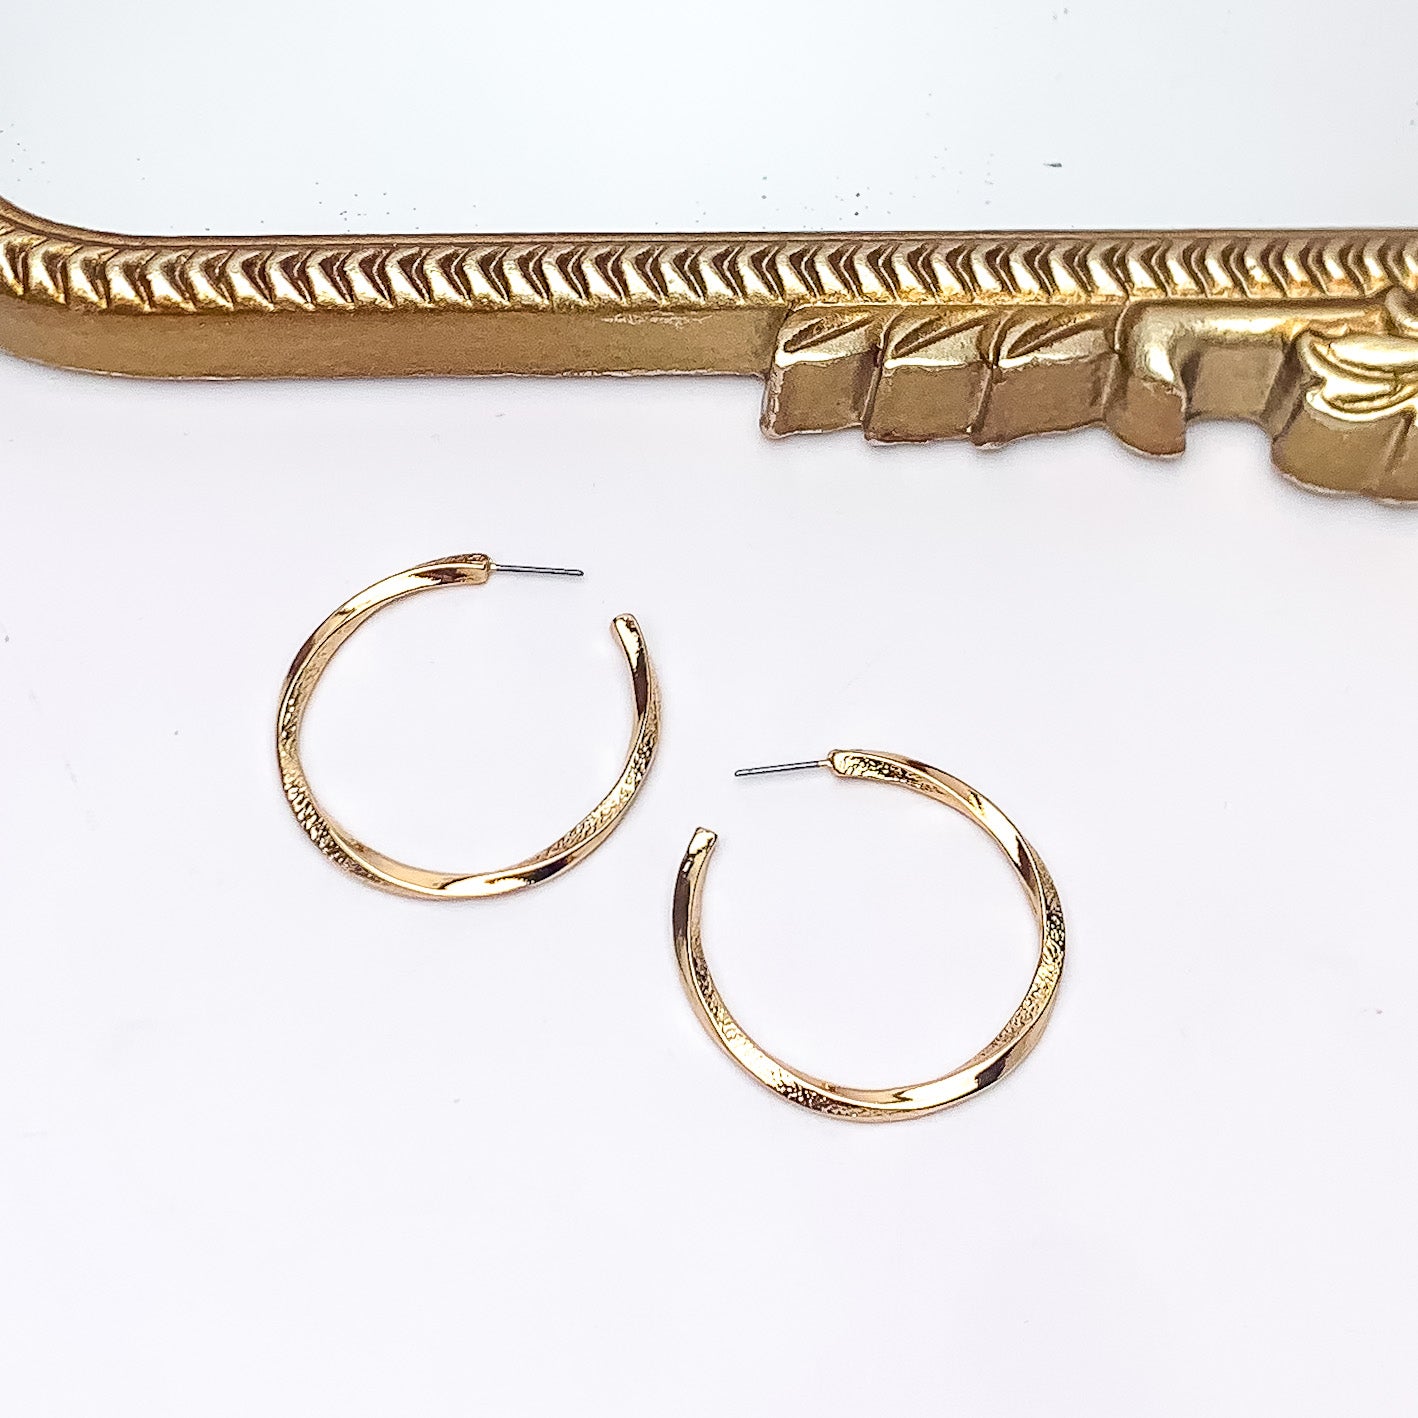 City Day Large Gold Tone Hoop Earrings. Pictured on a white background with a gold frame above the earrings.